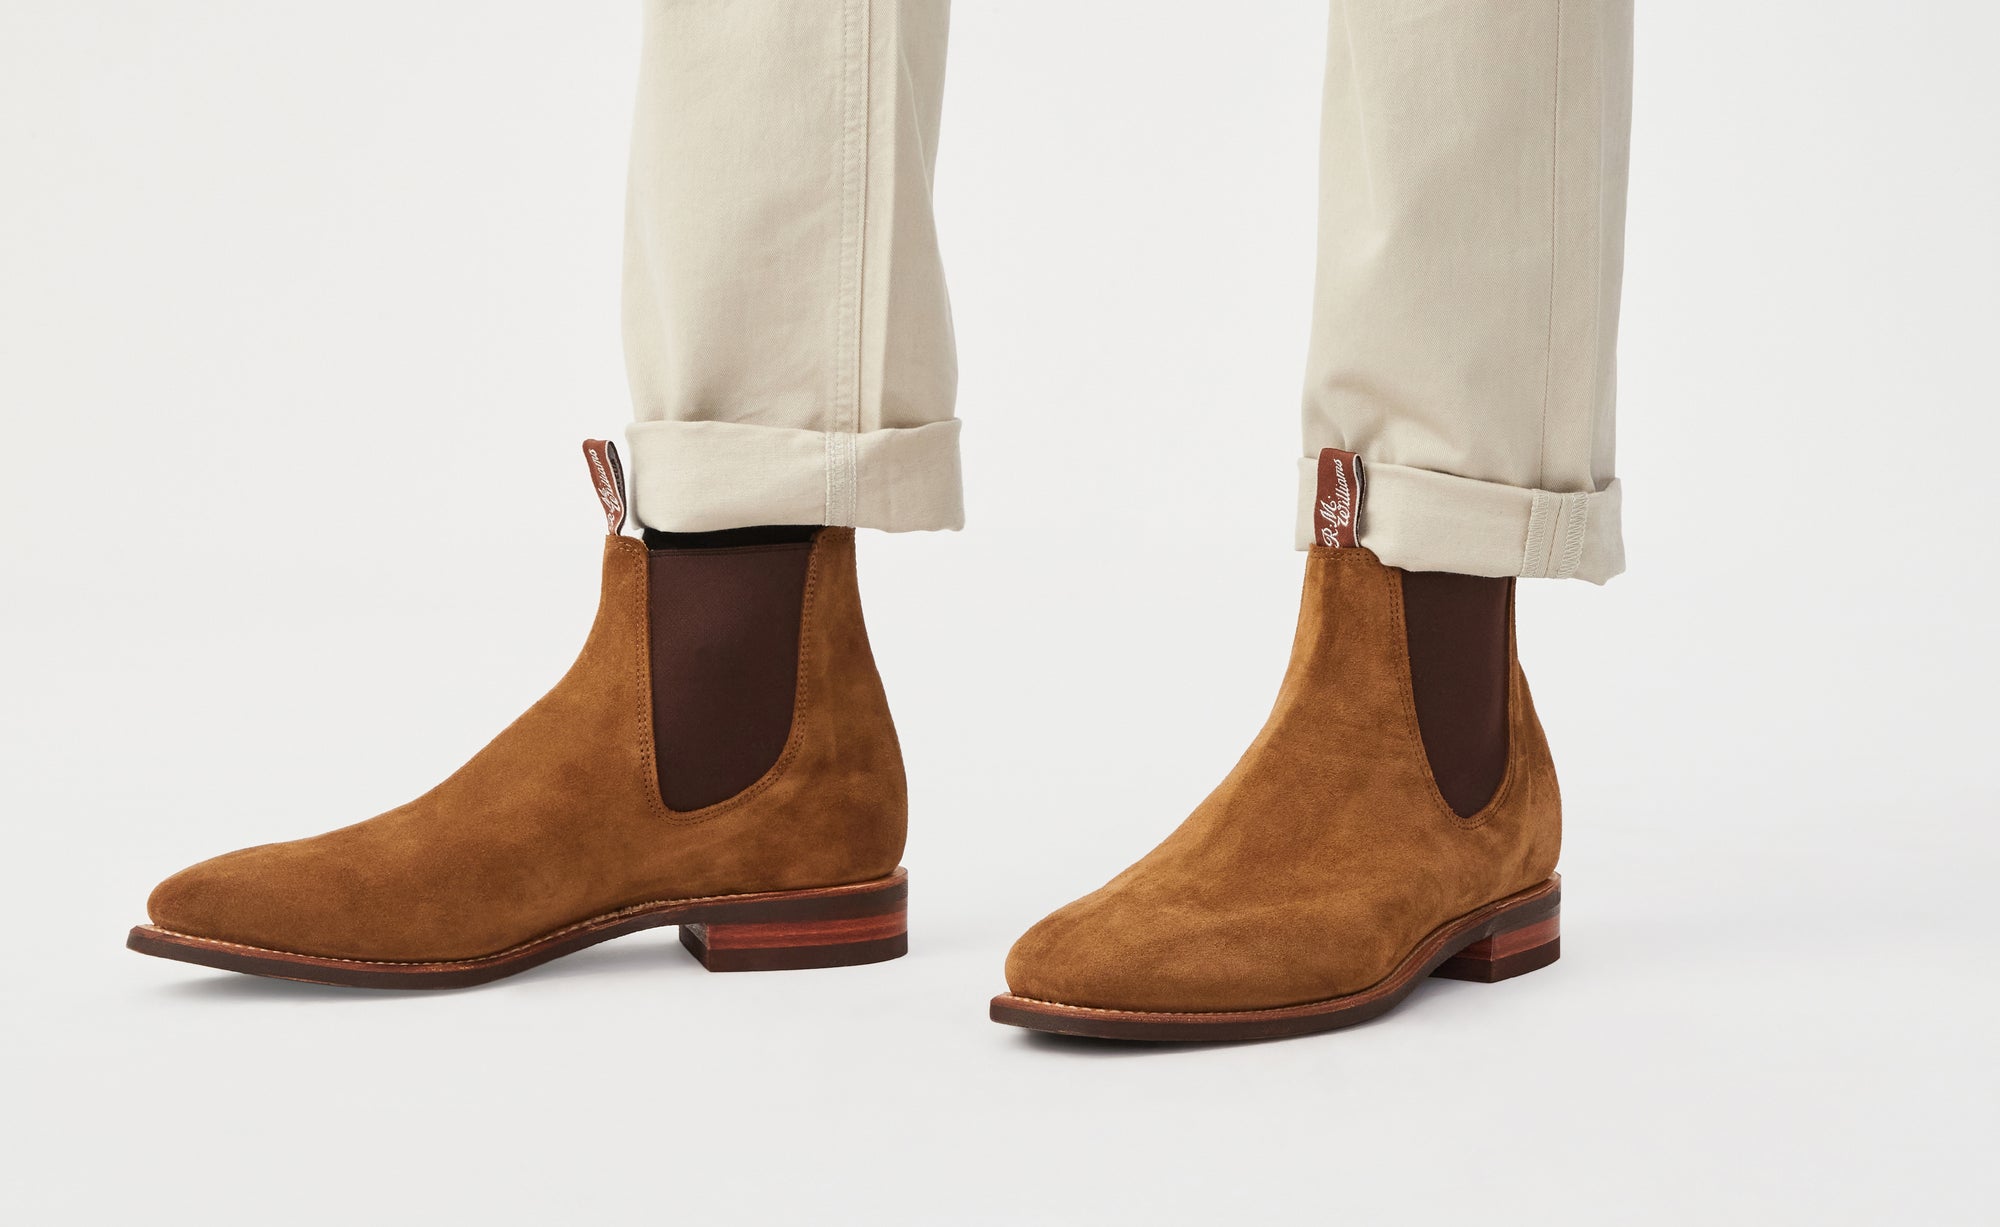 How to care for Suede boots